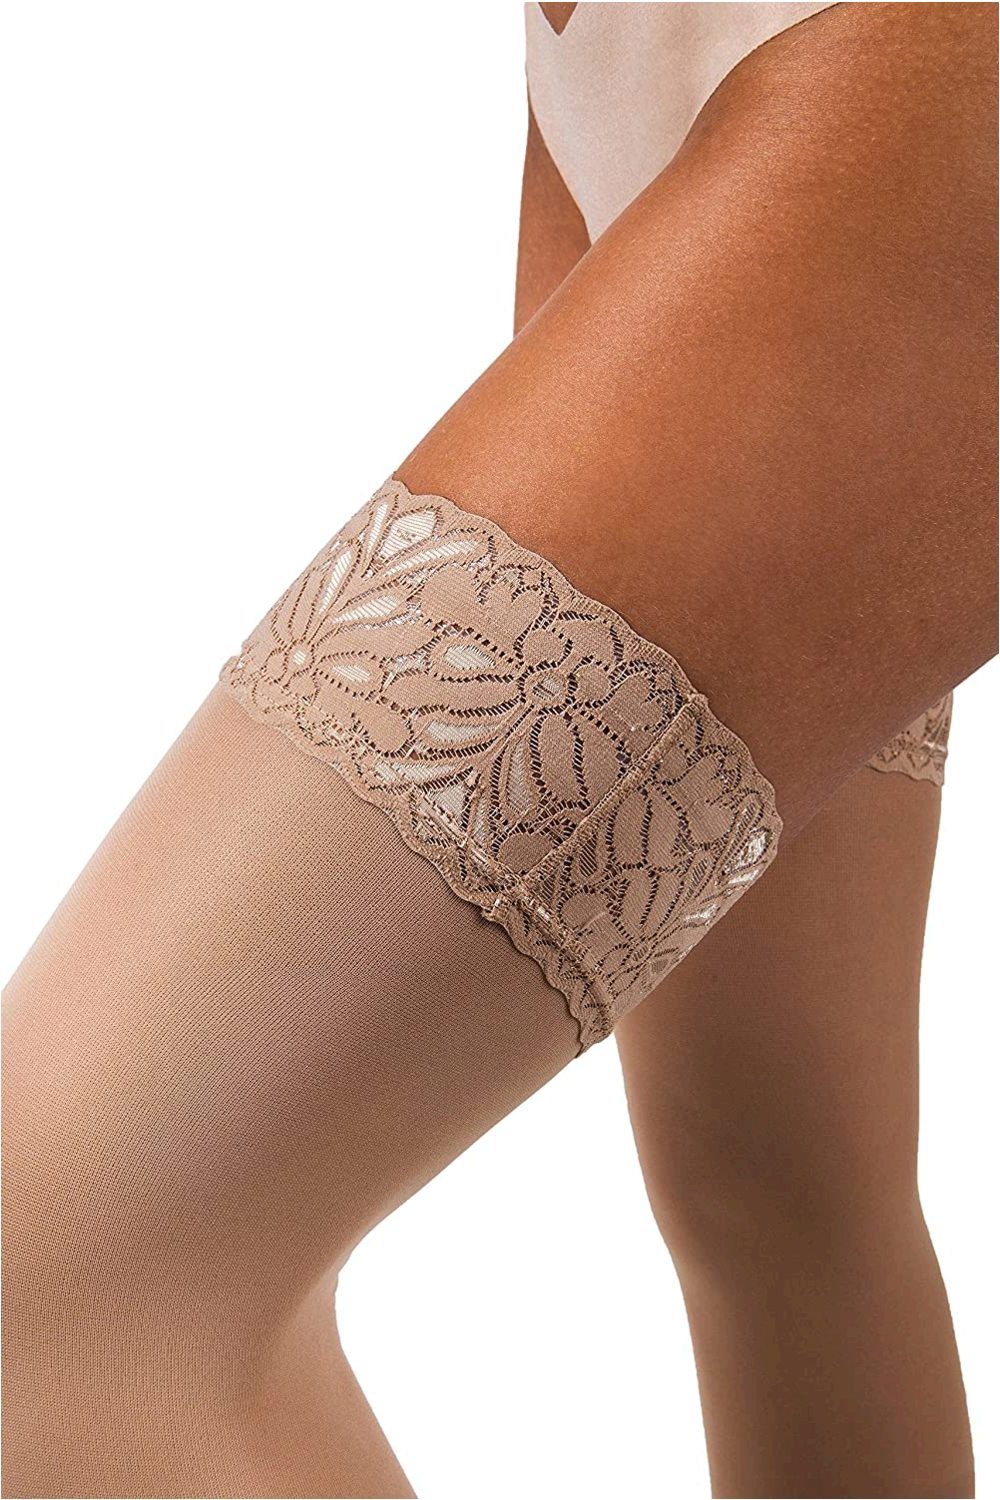 Sofsy Lace Thigh High Stockings For Women Hold Up Nylon Natural